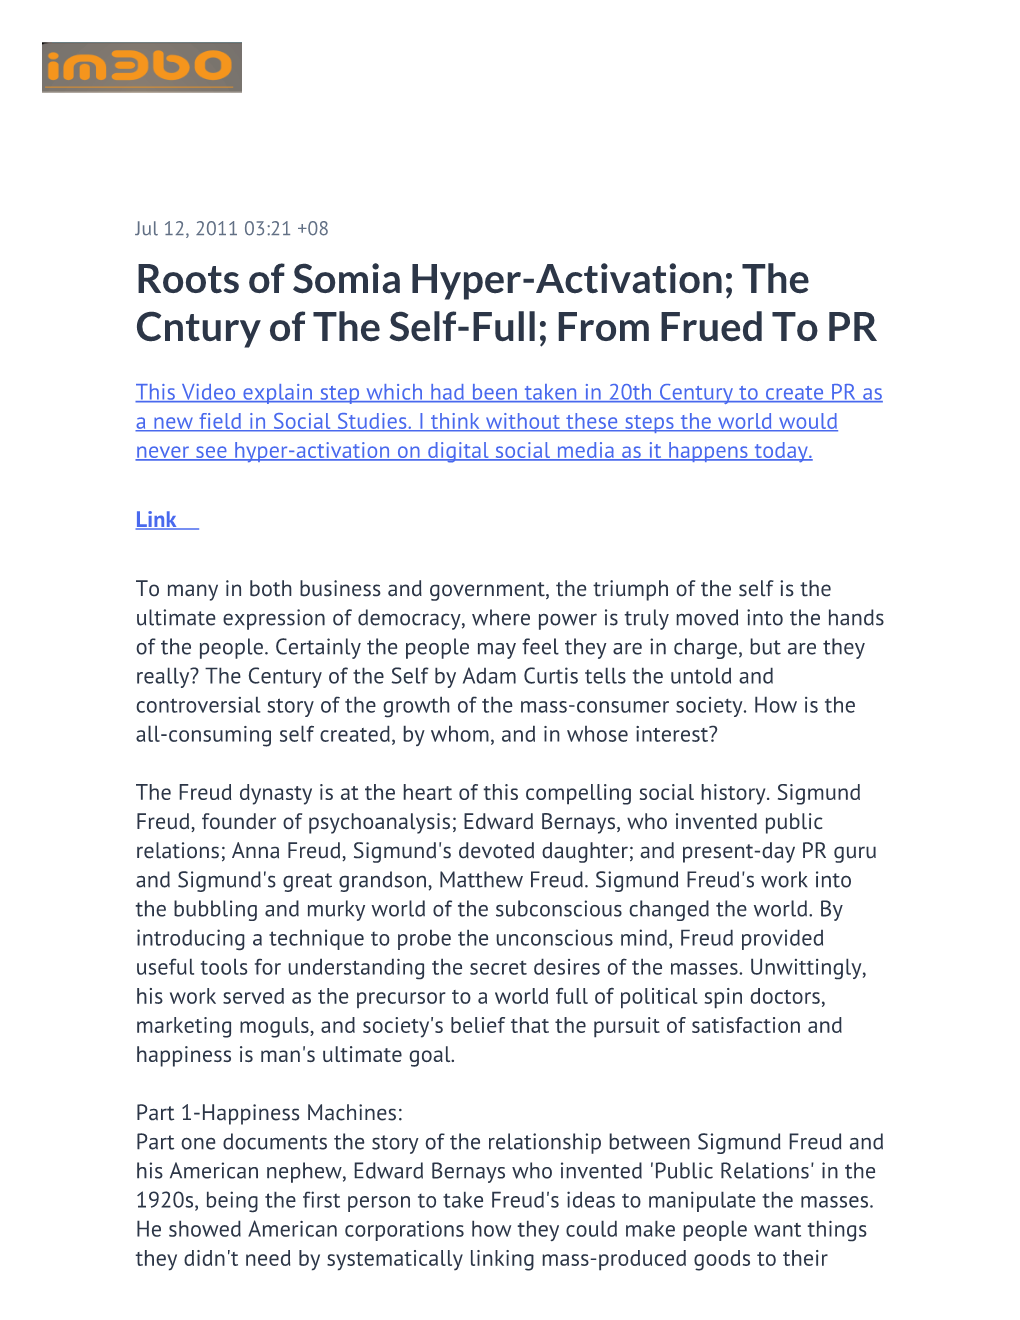 Roots of Somia Hyper-Activation; the Cntury of the Self-Full; from Frued to PR